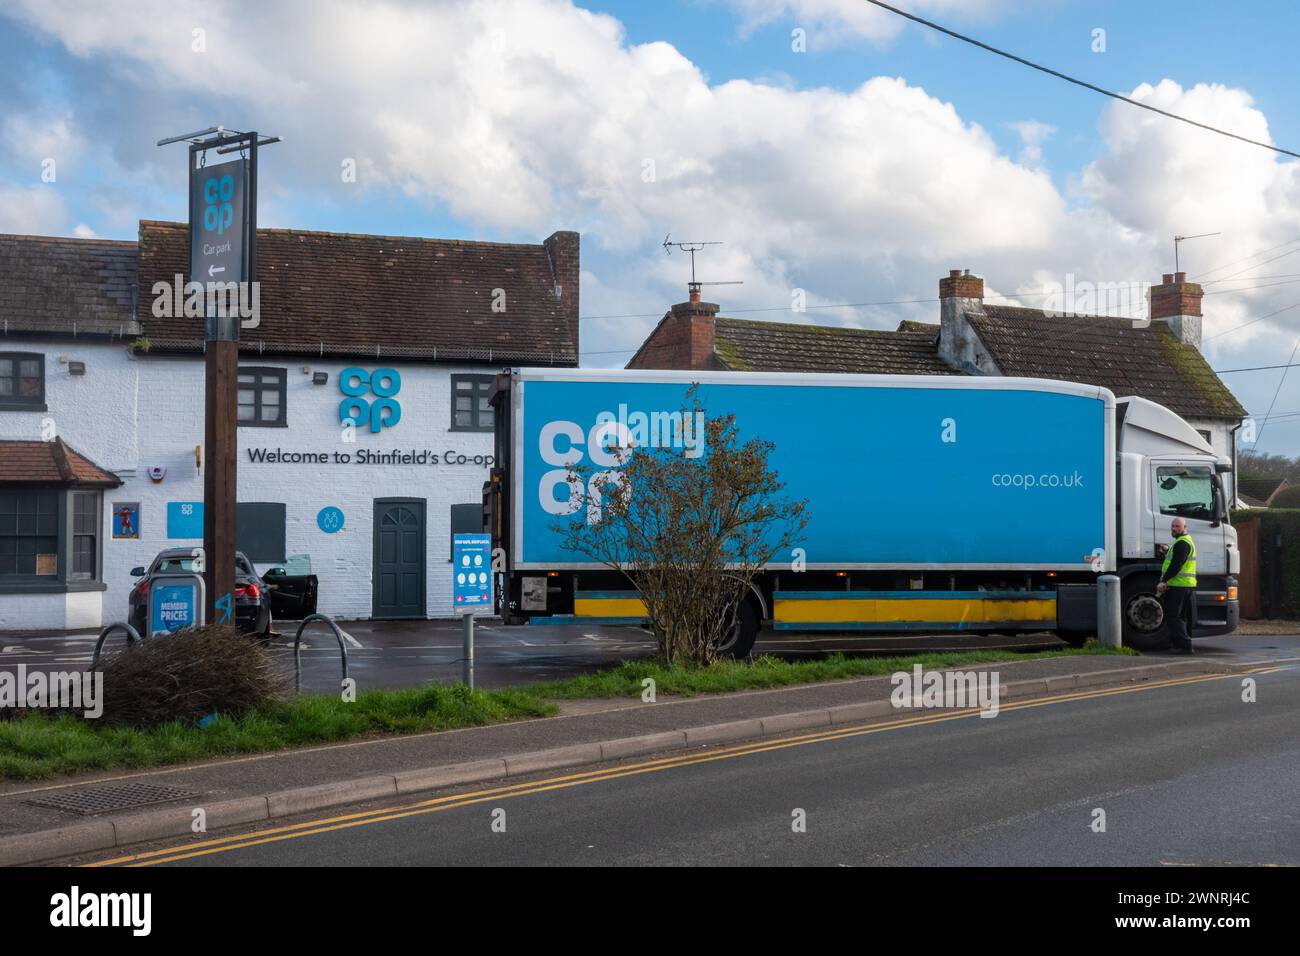 Co-op village shop and delivery van or lorry in Shinfield, Berkshire, England, UK. Local convenience store Stock Photo